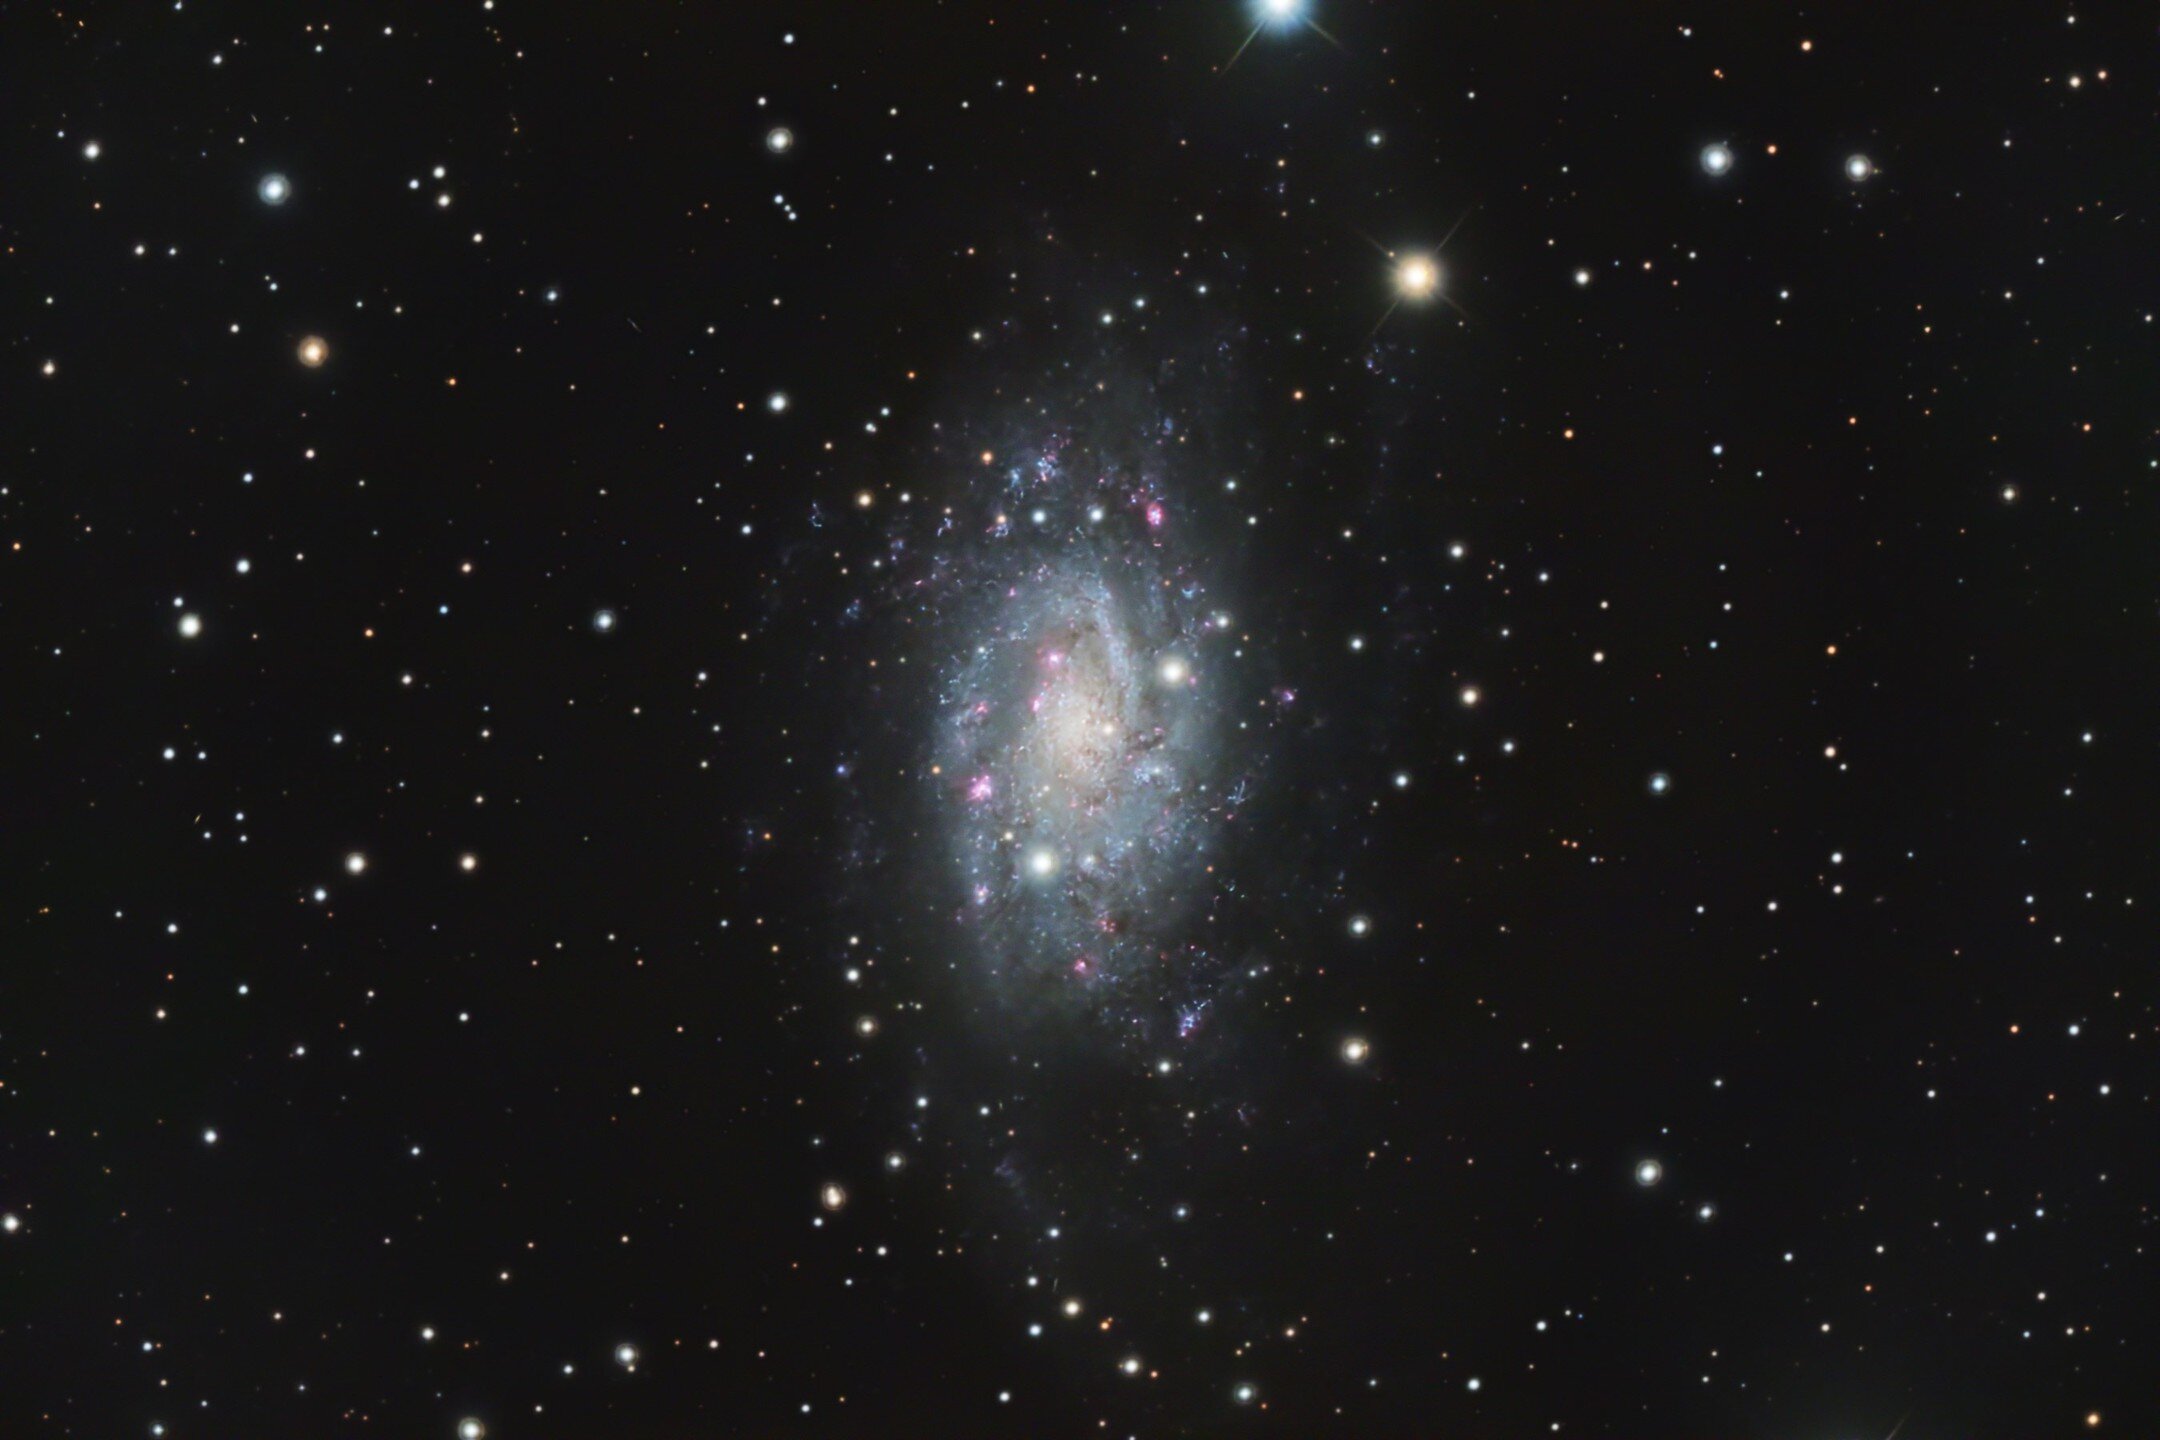 SPARQ is excited to share this recent astro photograph of the NGC2403 galaxy by Piner Junior and STEM Level 3 student, Emma Cho. 

From Emma: &ldquo;For this image, I focused on an intermediate spiral galaxy in the constellation Camelopardalis called